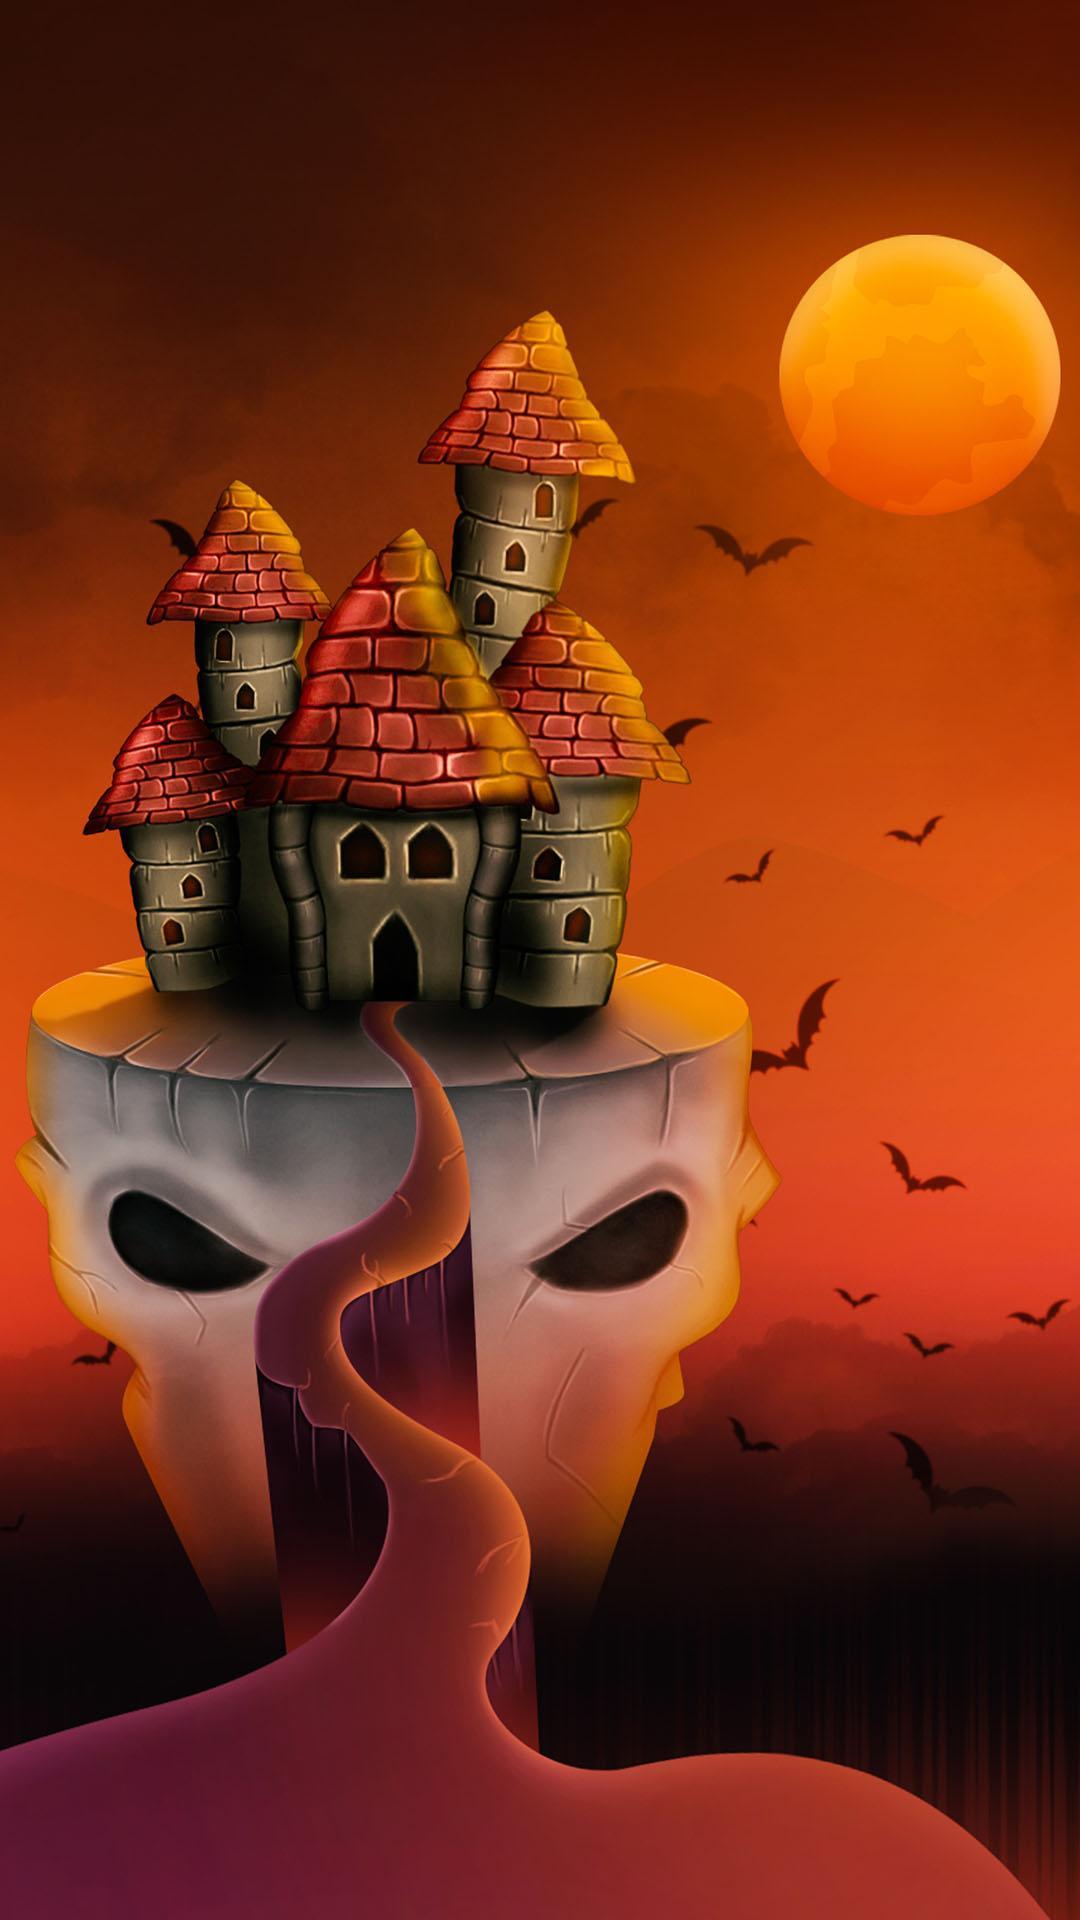 Halloween Wallpaper 4k Ultra Hd For Android Apk Download - wallpaper roblox halloween background